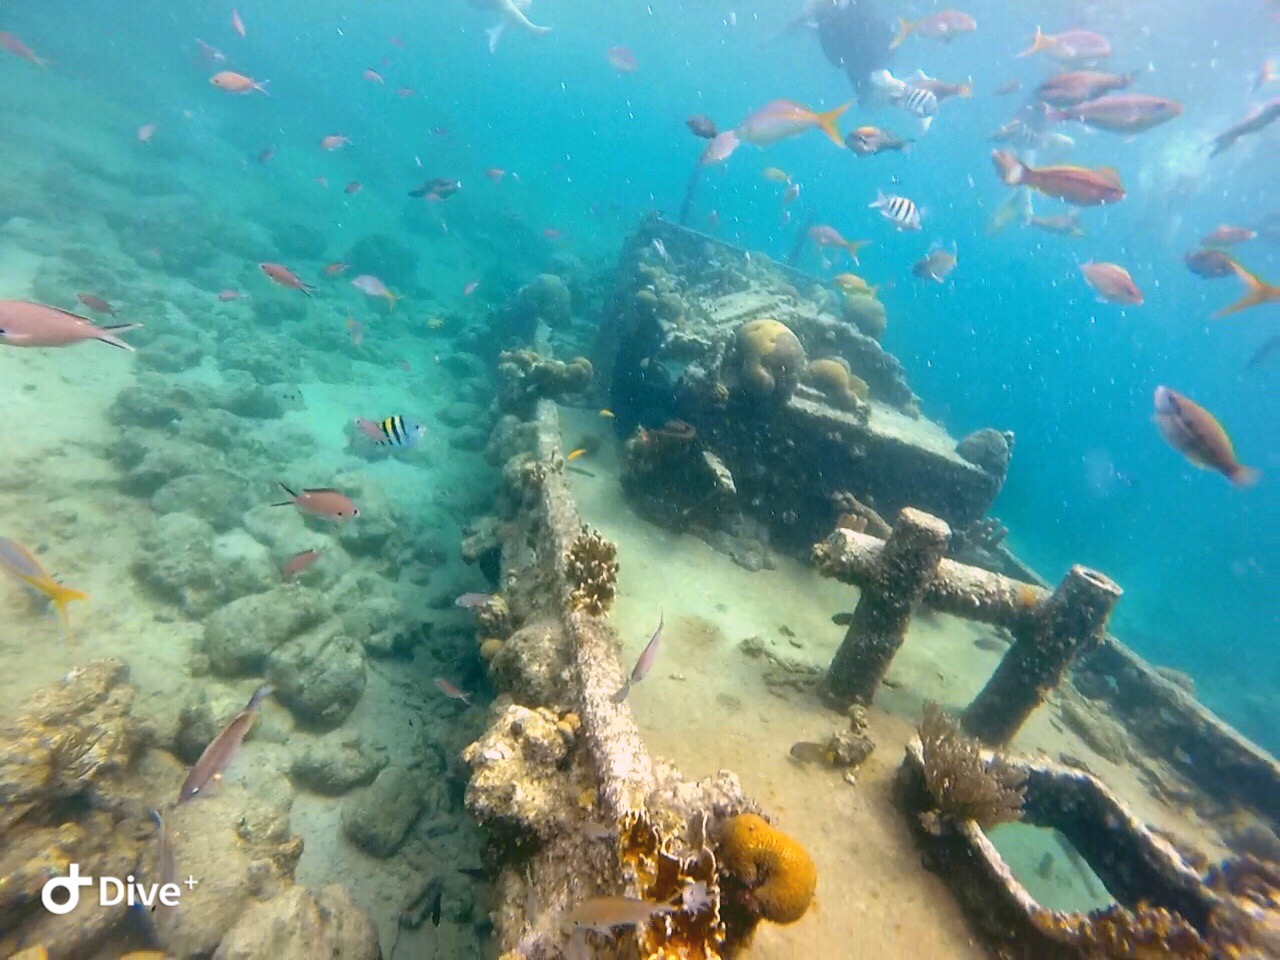 Diving the tugboat wreck off the coast of Curacao.